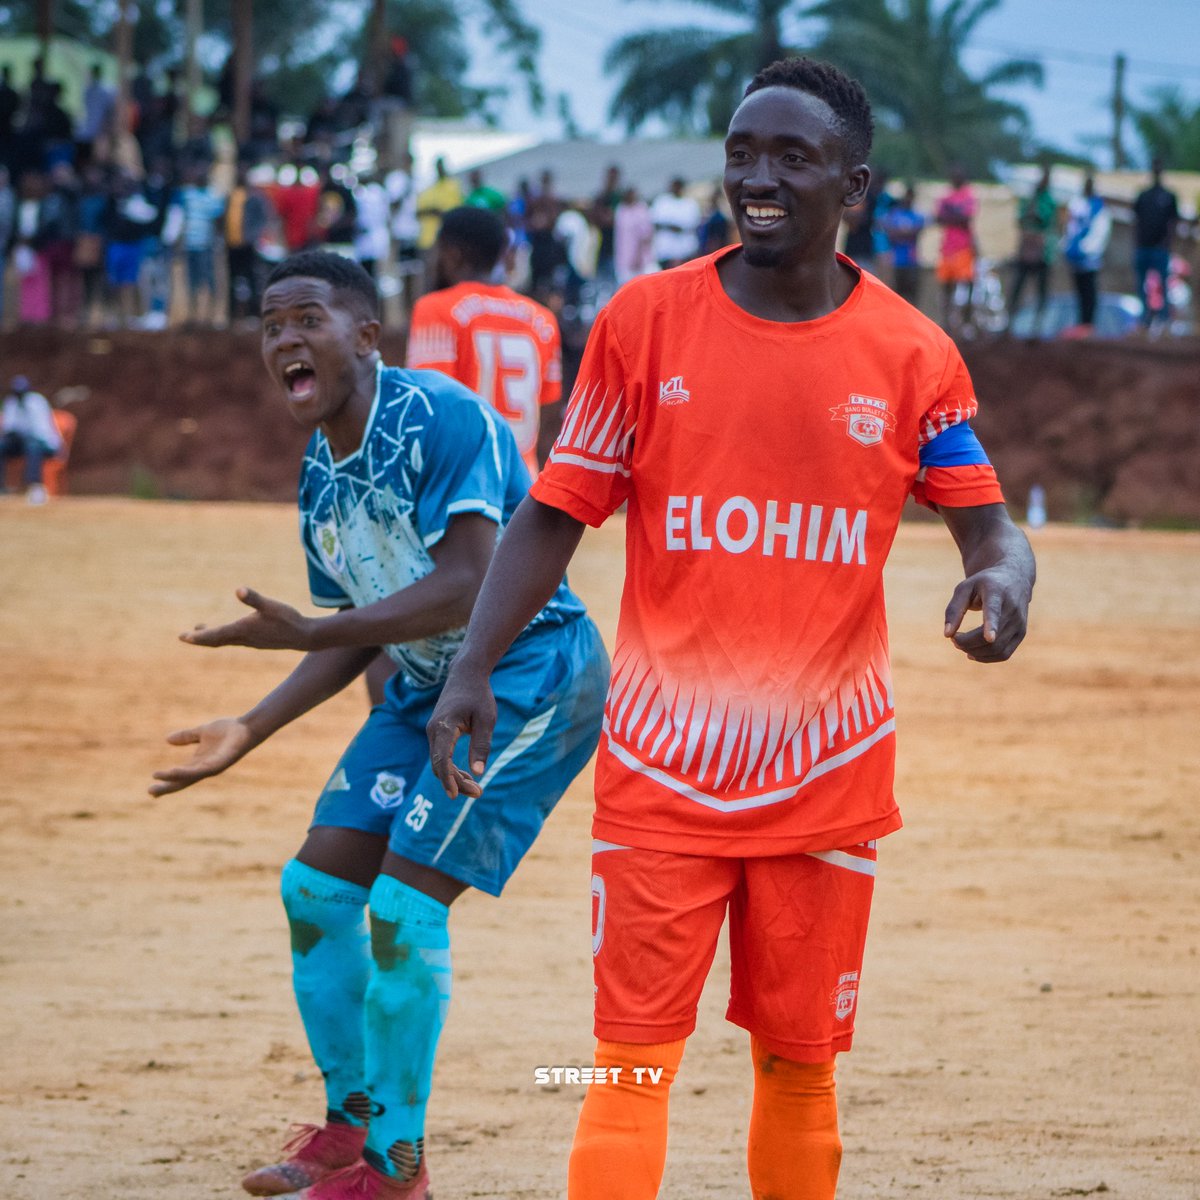 Two sides of football
.
#cupofcamerooon #fecafoot #photography